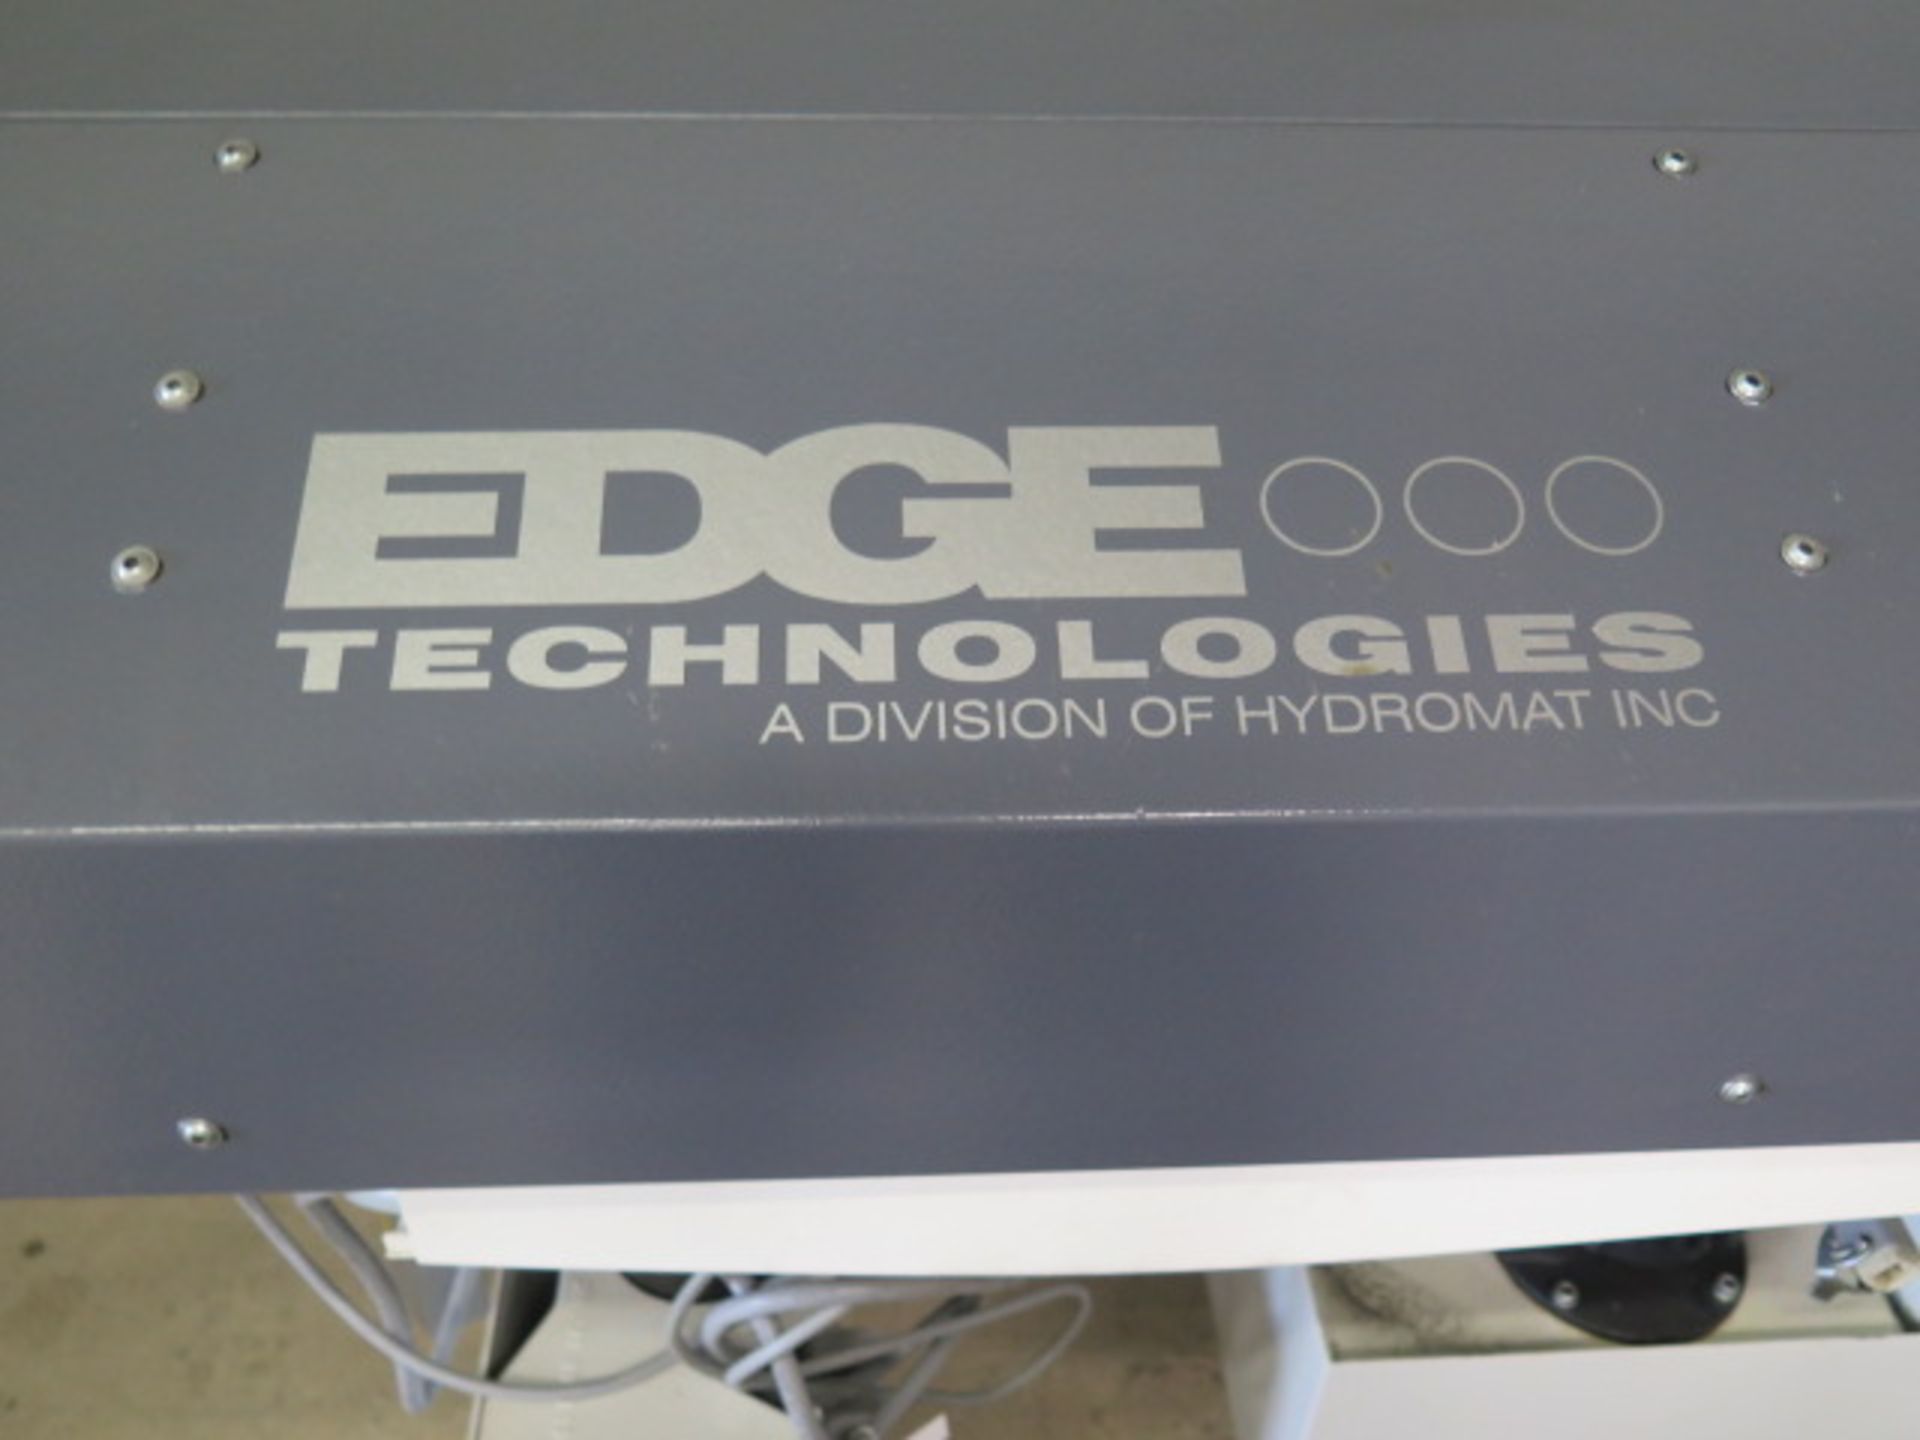 FMB / Edge Technologies "Minimag 18" Automatic Bar Loader / Feeder s/n 36-161505 SOLD AS IS - Image 2 of 9